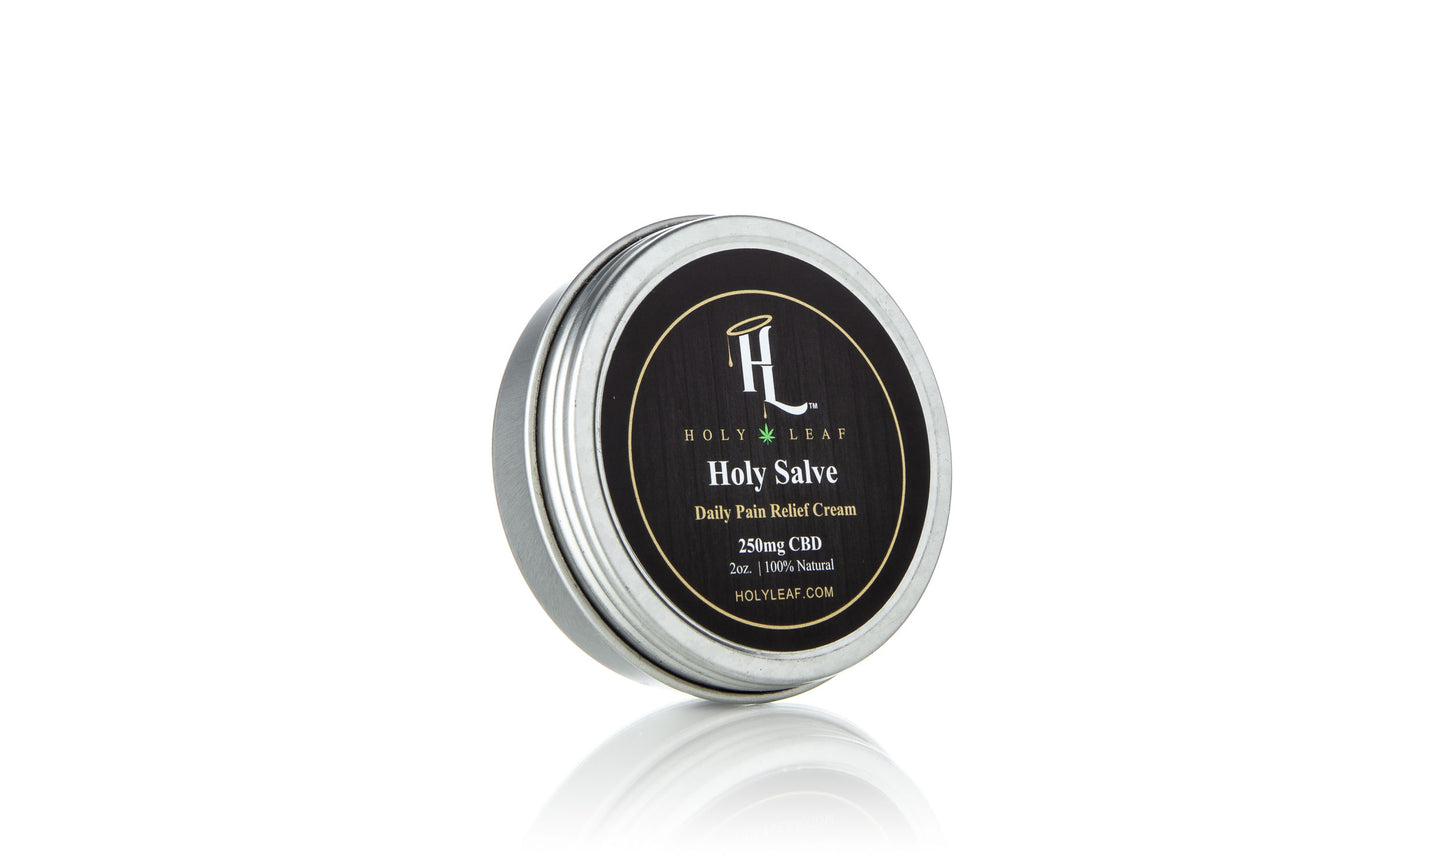 Holy Leaf CBD Infused Pain Relief Salve